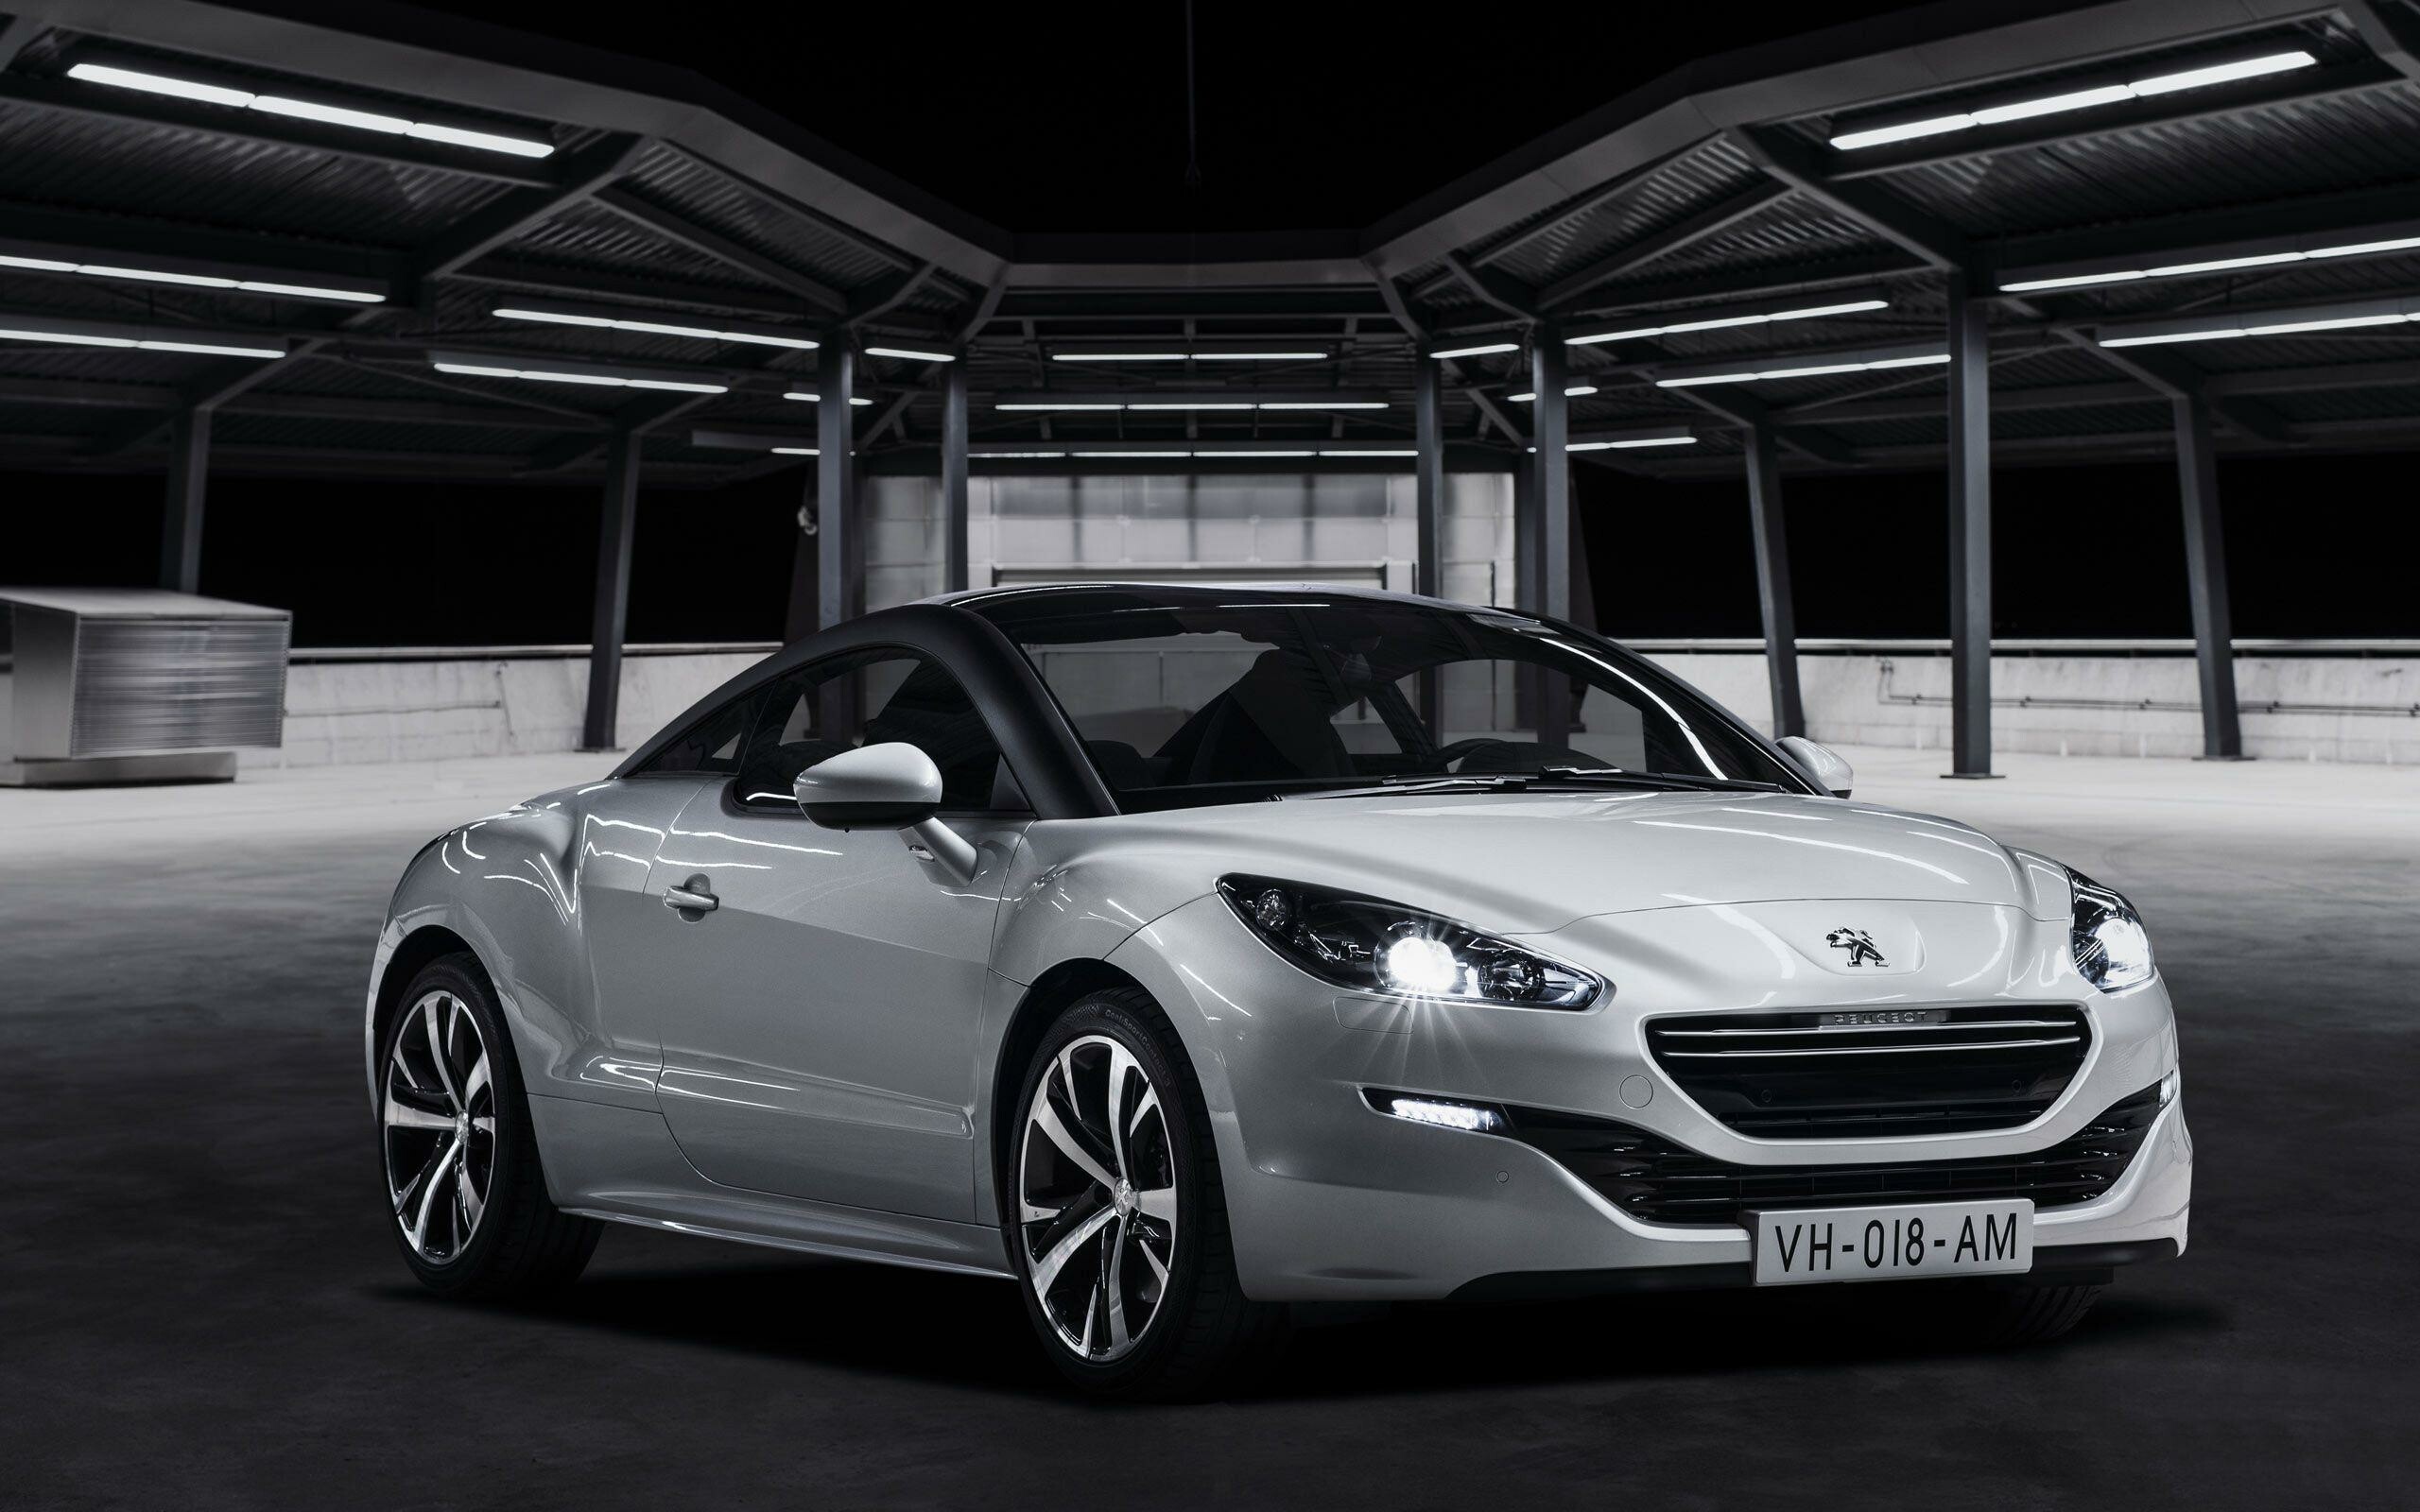 Peugeot: Model RCZ, The first steam-powered car was produced in 1889. 2560x1600 HD Wallpaper.